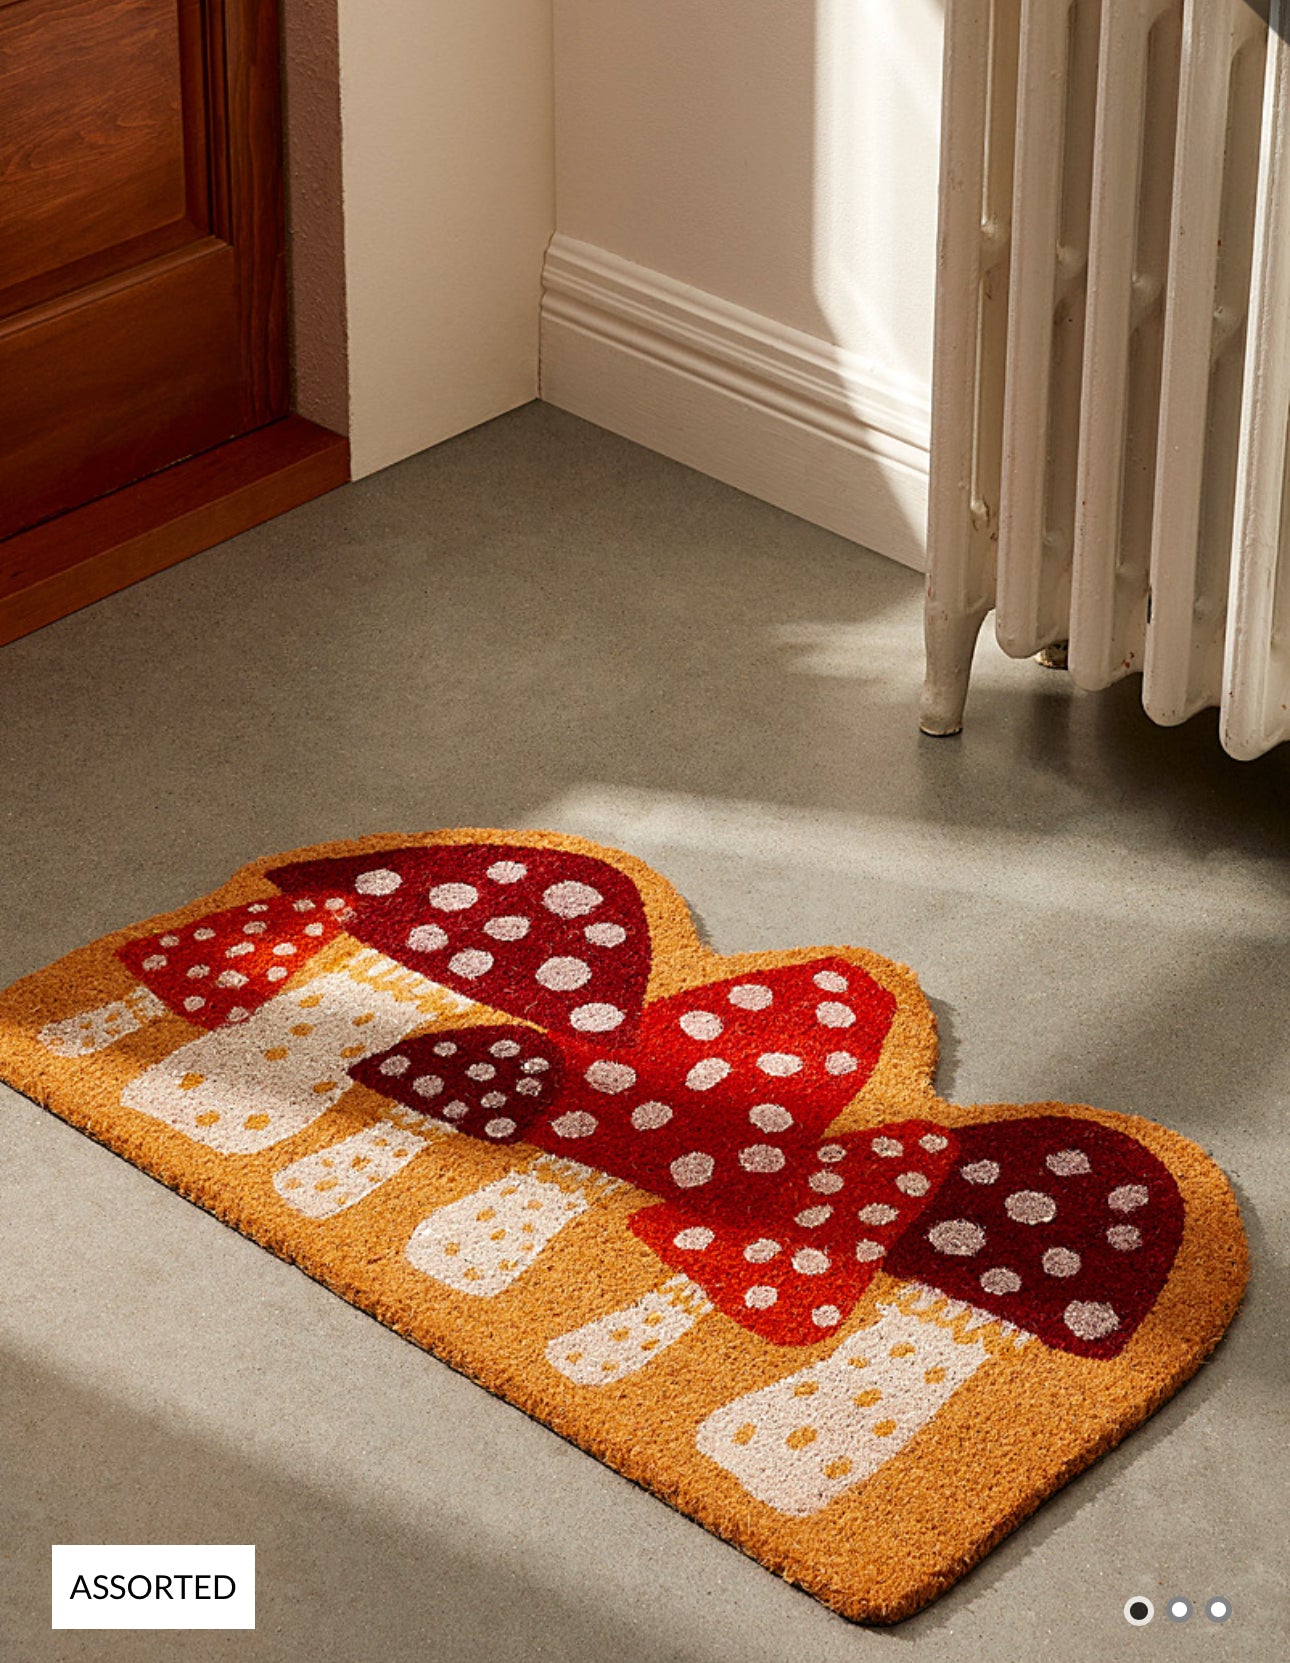 Mushroom Shaped Doormat - Out of the Blue